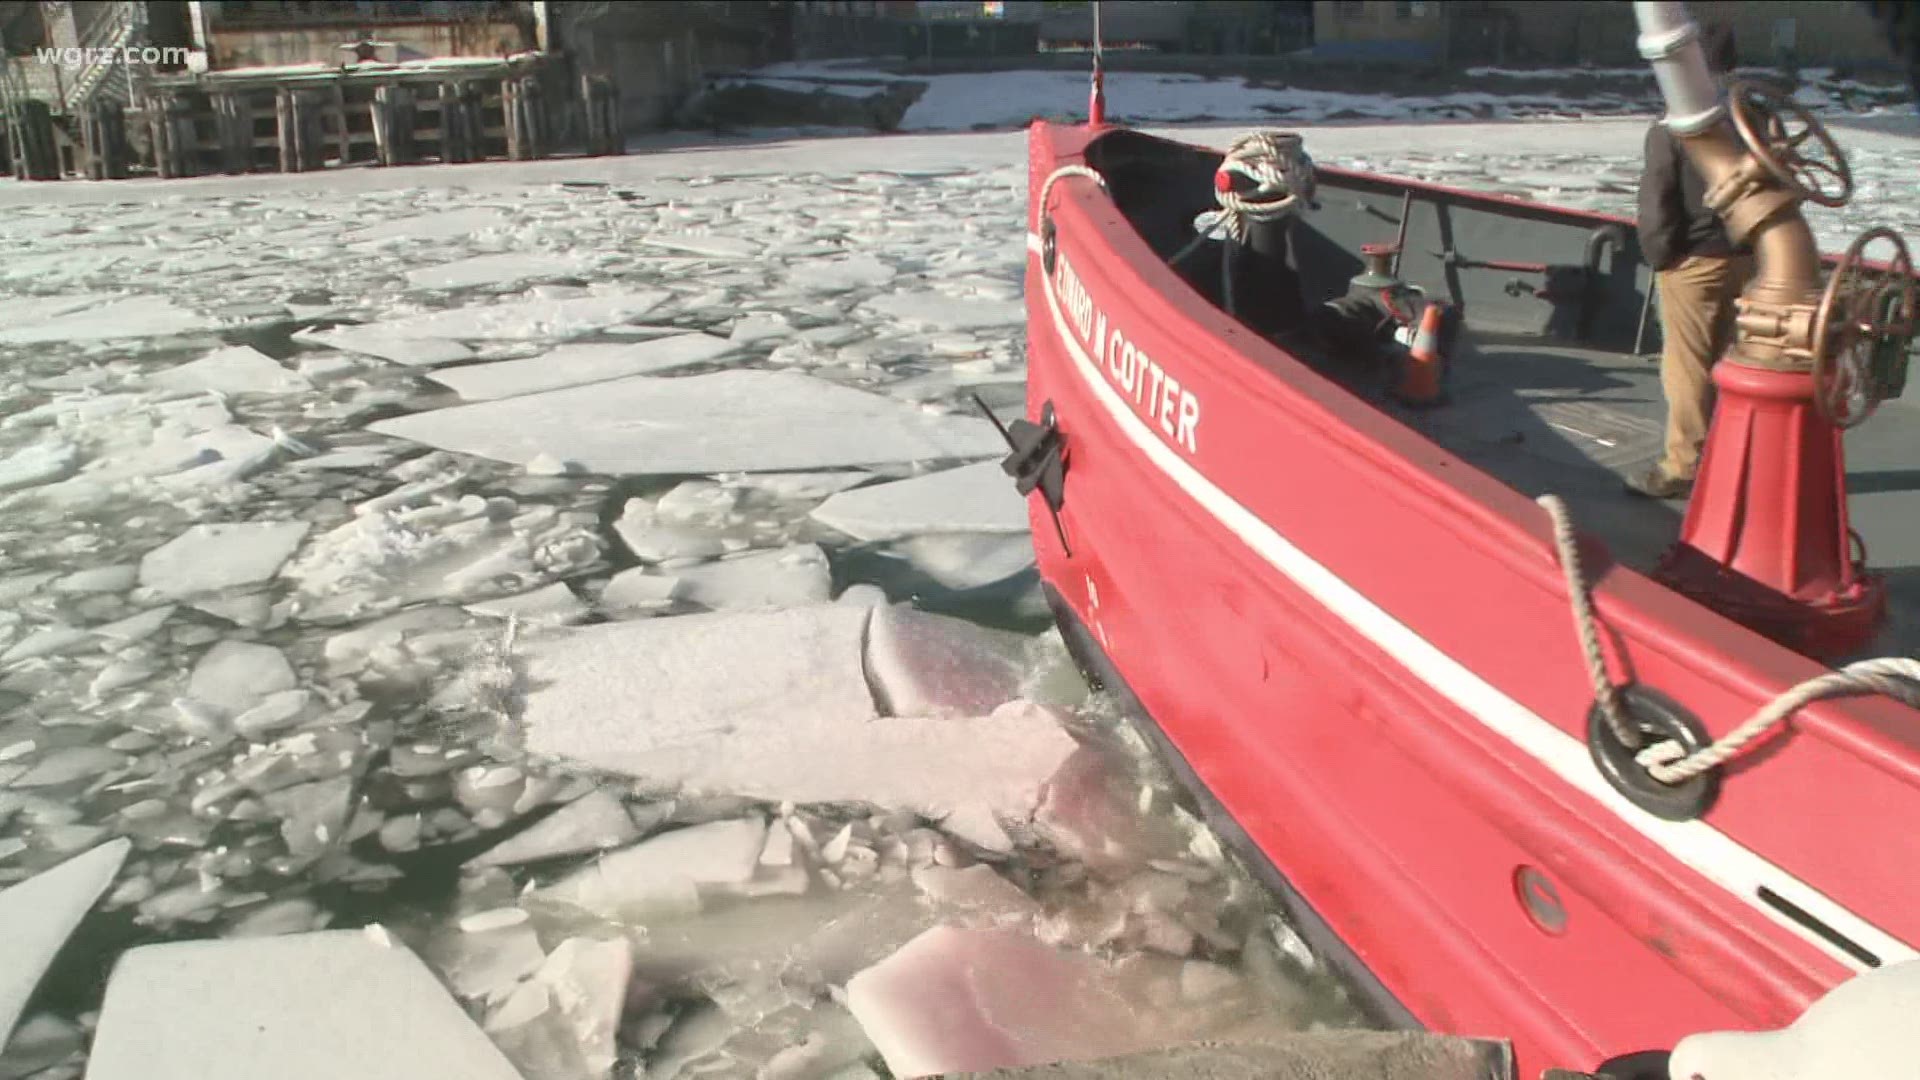 The Edward Cotter fire boat was out along the Buffalo River, breaking up the ice so there's less of a chance of it jamming downriver and causing flooding.